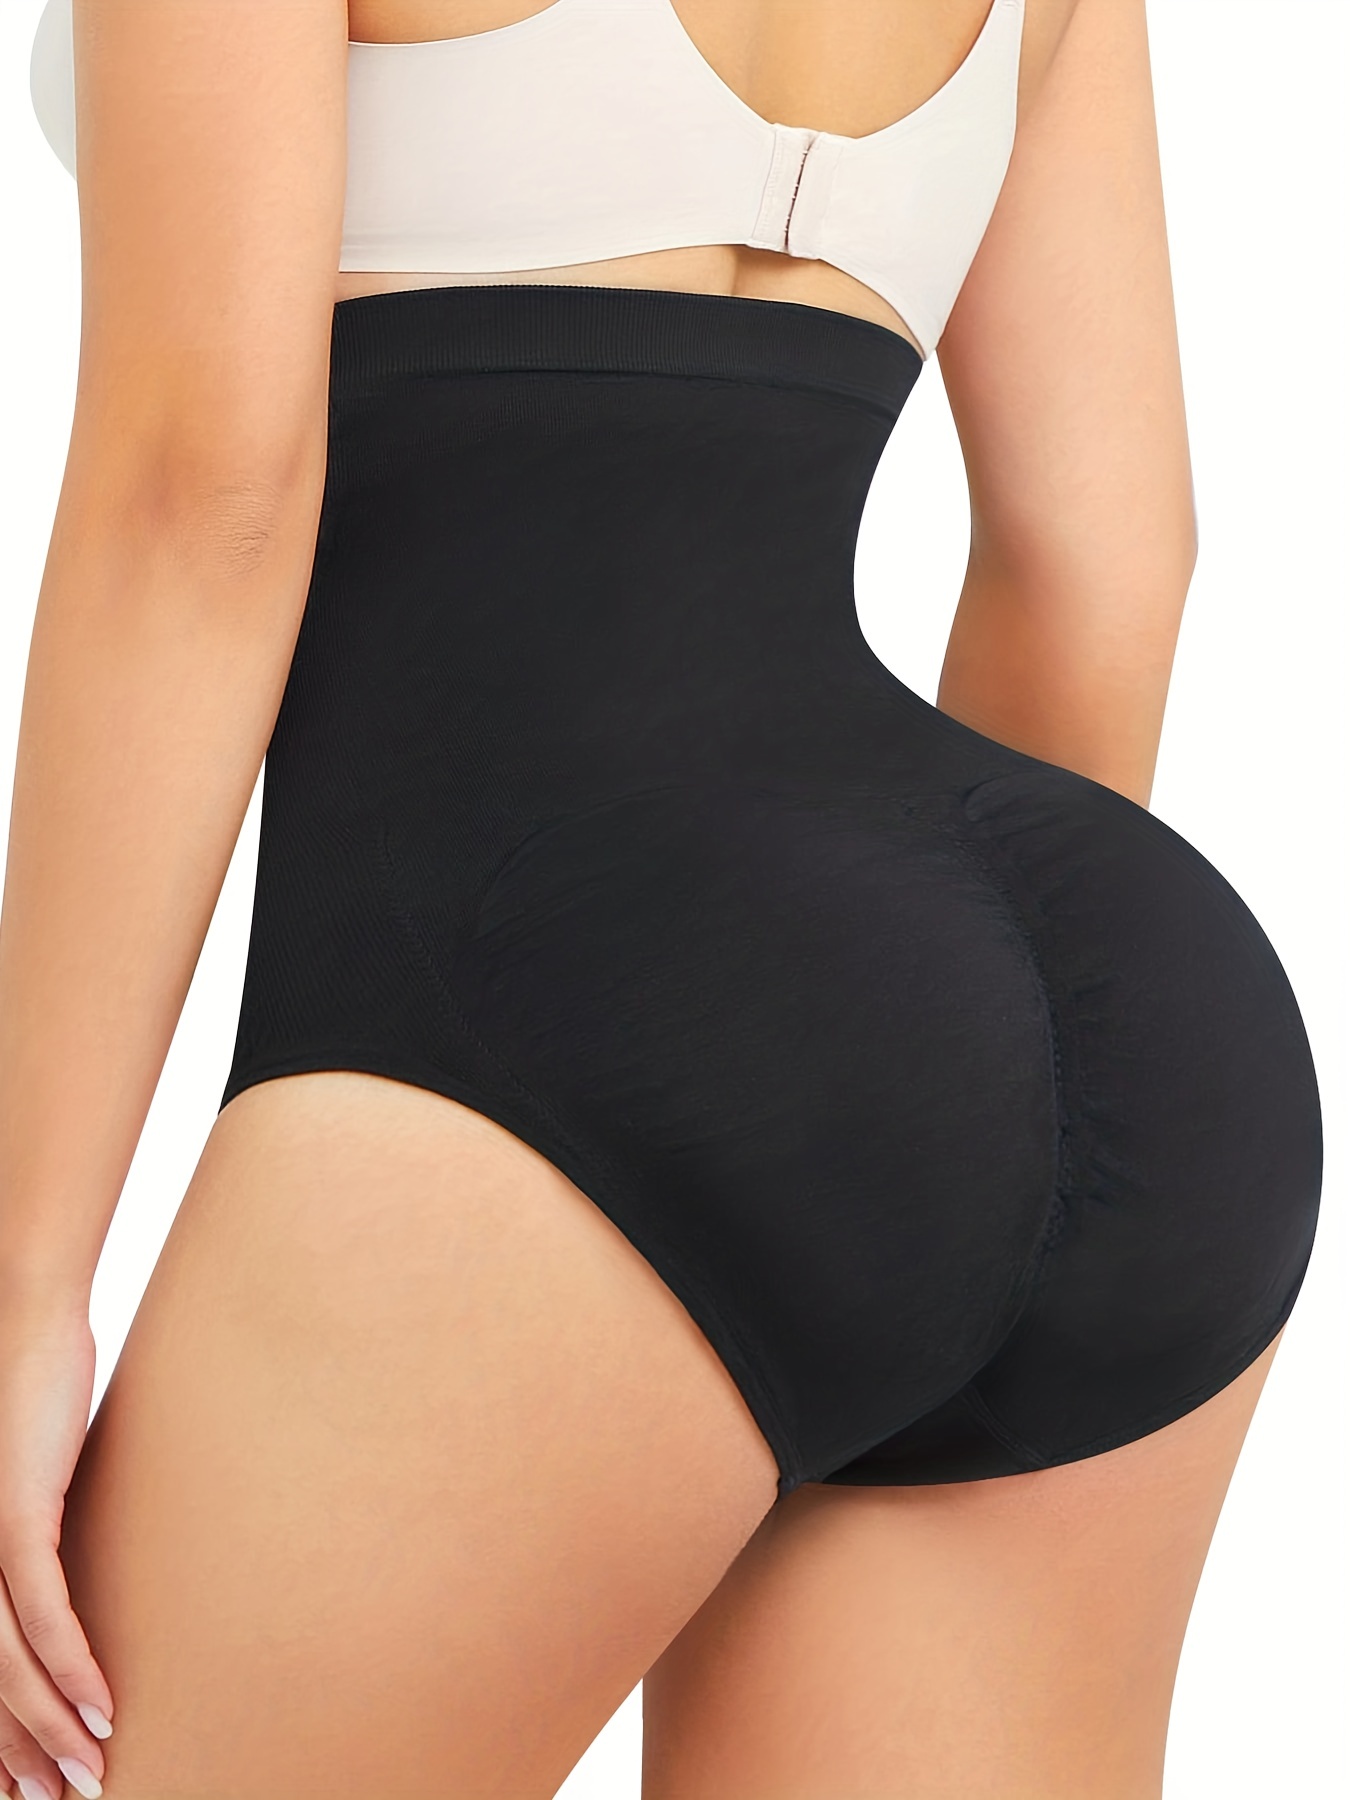 Foreign Women Body Shaper Padded Butt Hip Lifter Shorts in Central Business  District - Clothing Accessories, Ayo Opeyemi